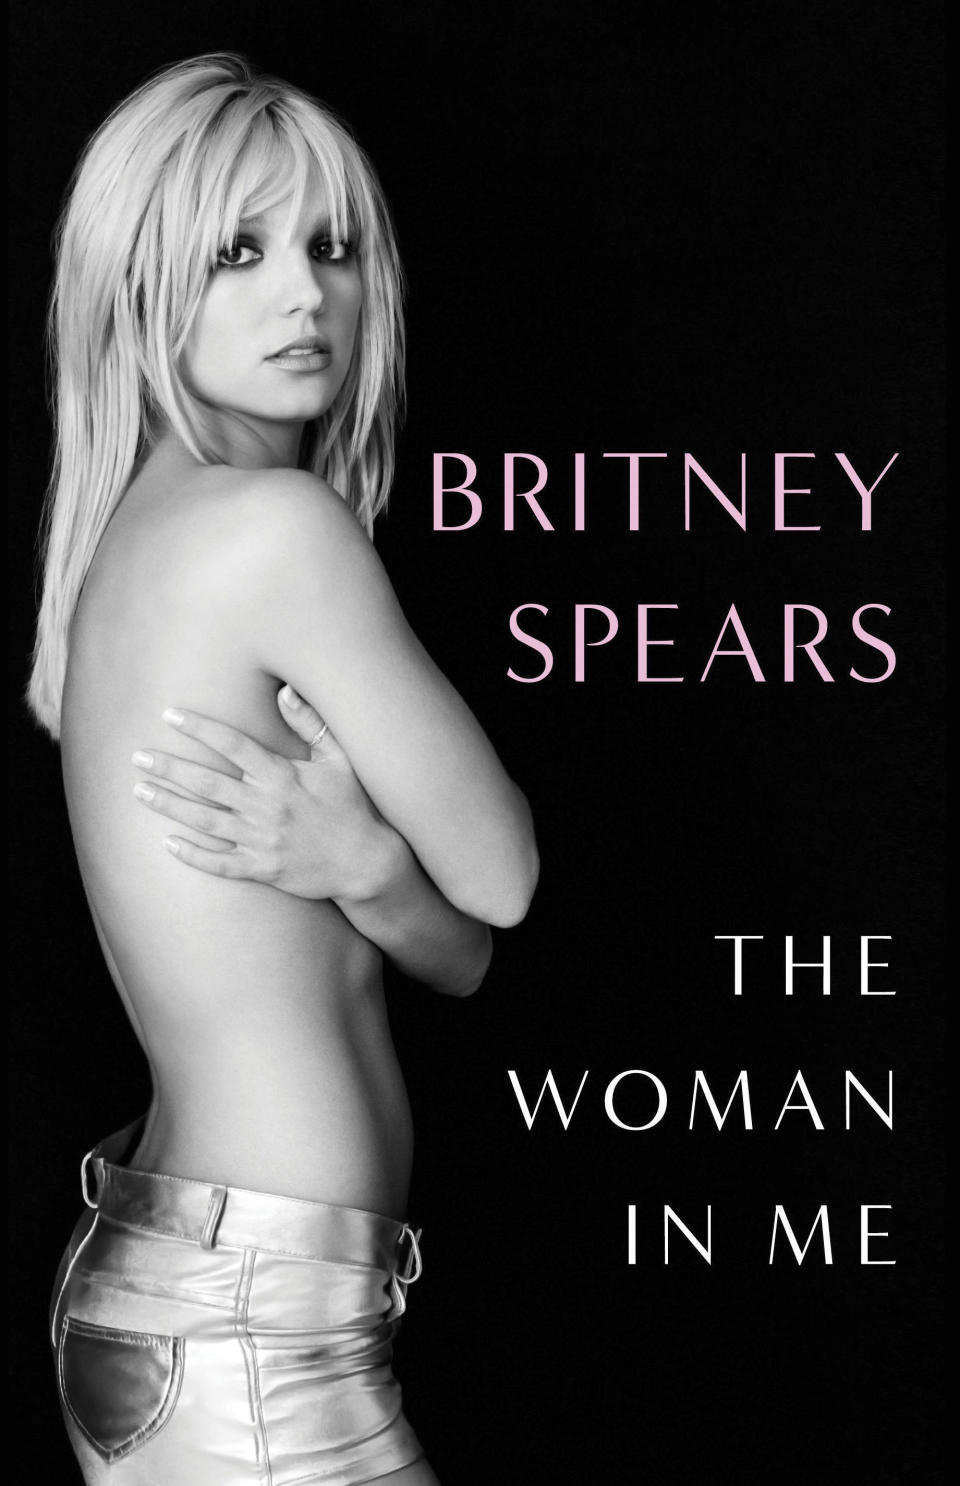 This cover image released by Gallery Books shows "The Woman in Me" by Britney Spears, releasing Tuesday, Oct. 24. (Gallery Books via AP)